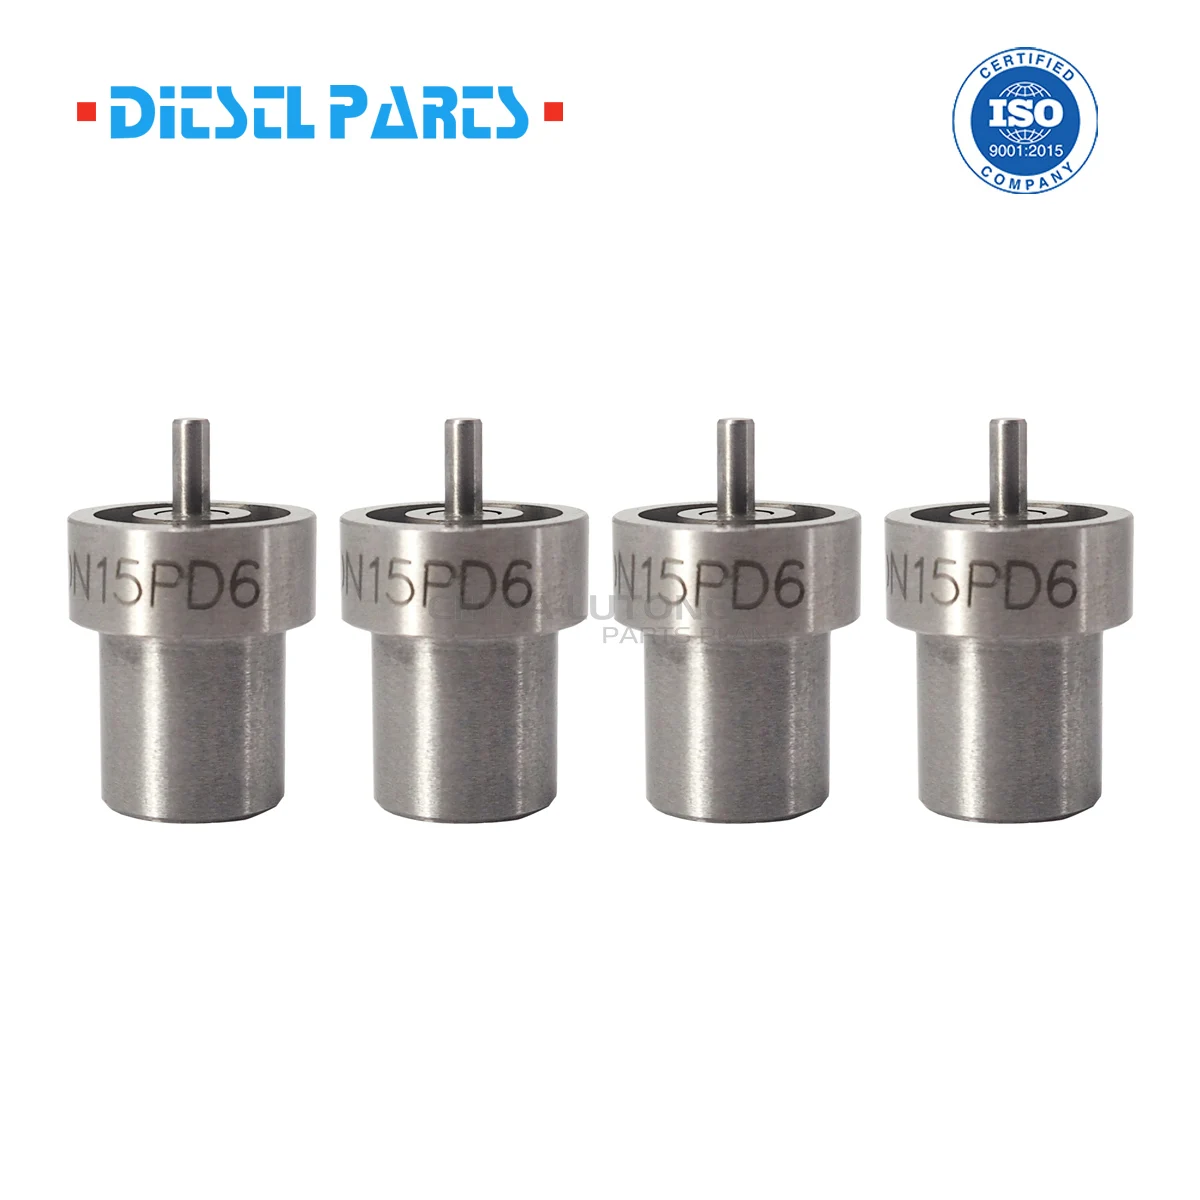 

Fuel Nozzle Replacement Parts DN15 PD6 Diesel Injector Nozzle 093400-5060 MD603660 DN15PD6 For Mitsubishi 4D55 4D56 4D65